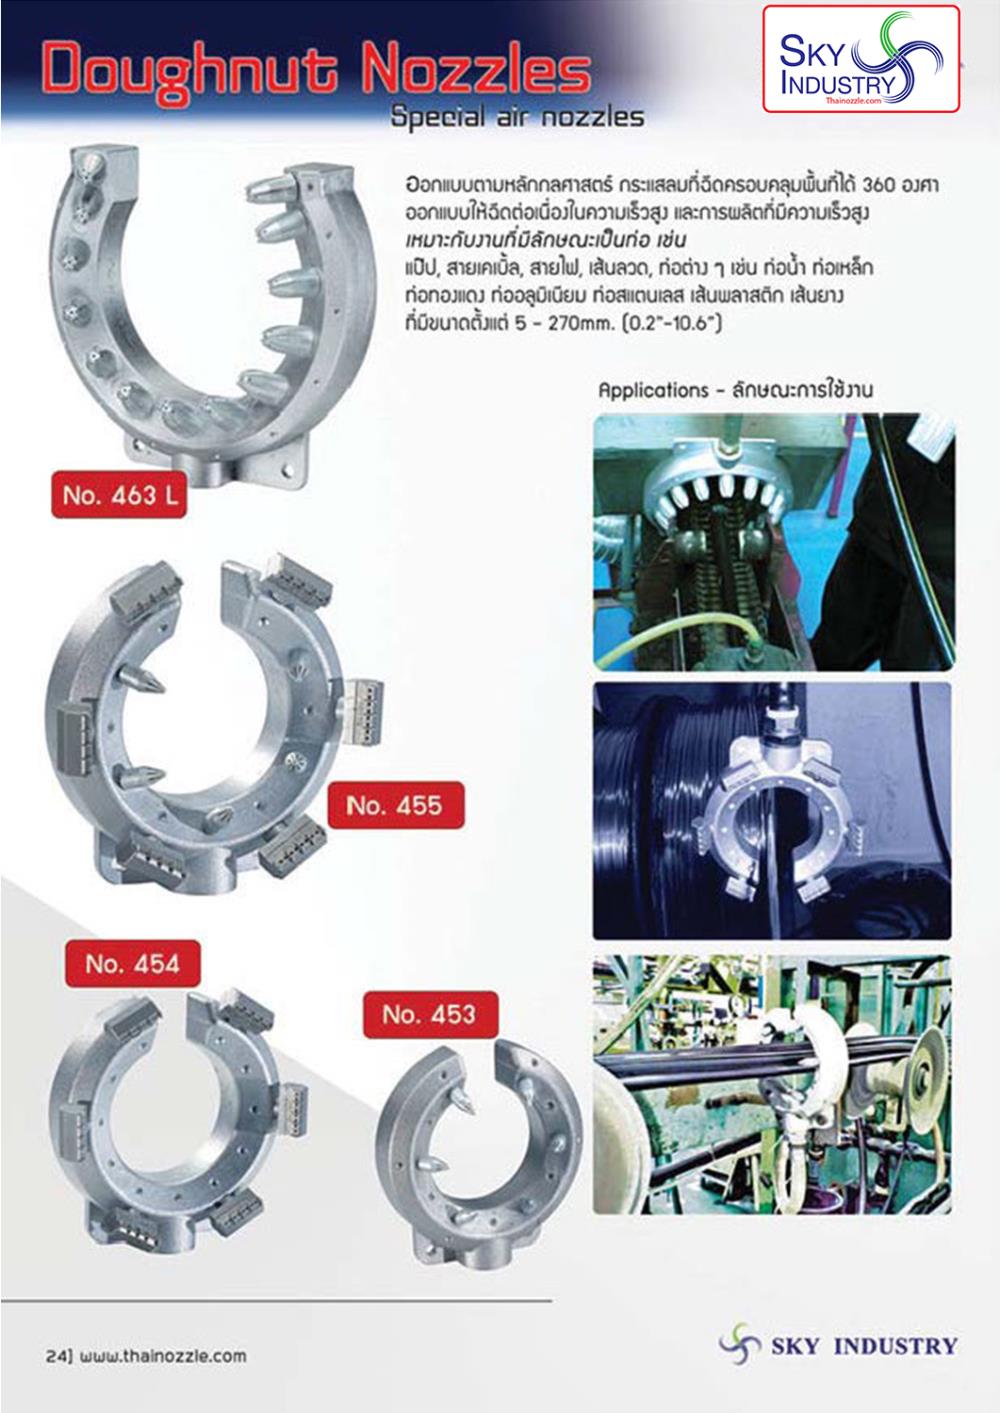 DOUGHNUT NOZZLES SPECIAL AIR NOZZLE,สำหรับงานเป่าแห้ง เป่าทำความสะอาดท่อ ,SKY,Tool and Tooling/Other Tools